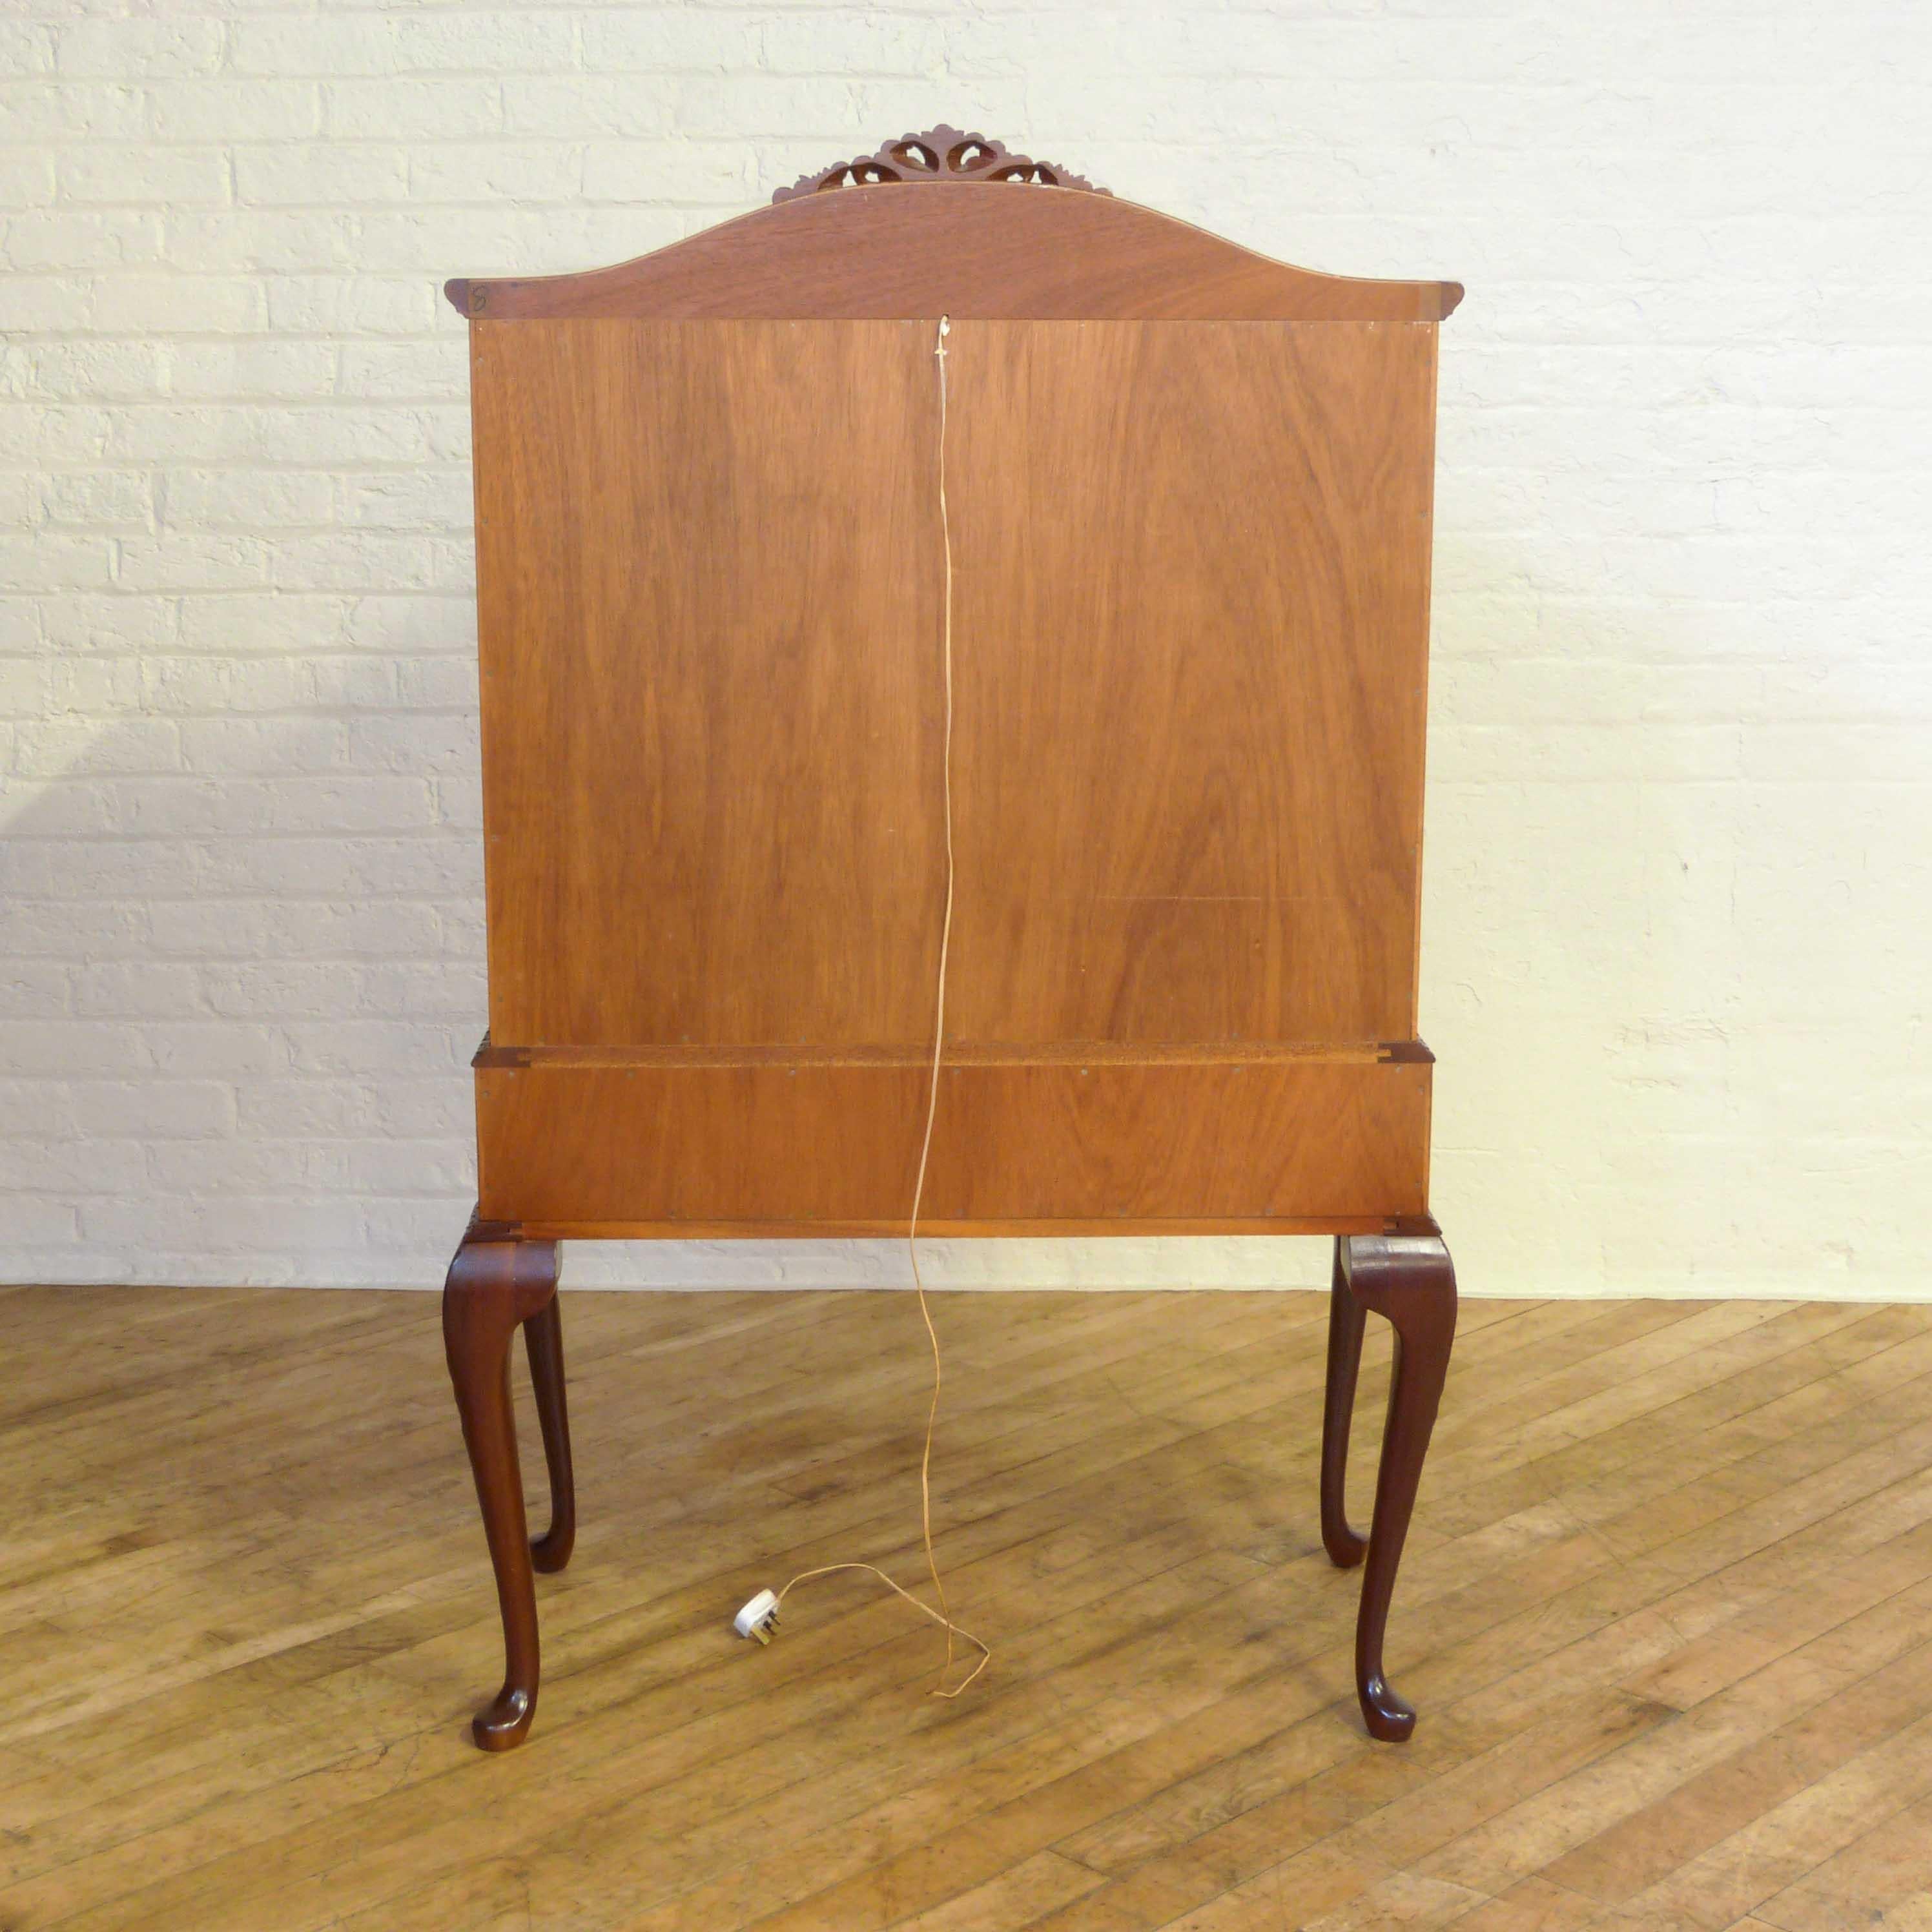 A Queen Anne style mahogany cocktail cabinet with a well shaped dome top with a carved pediment. The central section is nicely fitted with two shelves and a brushing slide to serve and mix from. The base has two drawers and is also well carved to